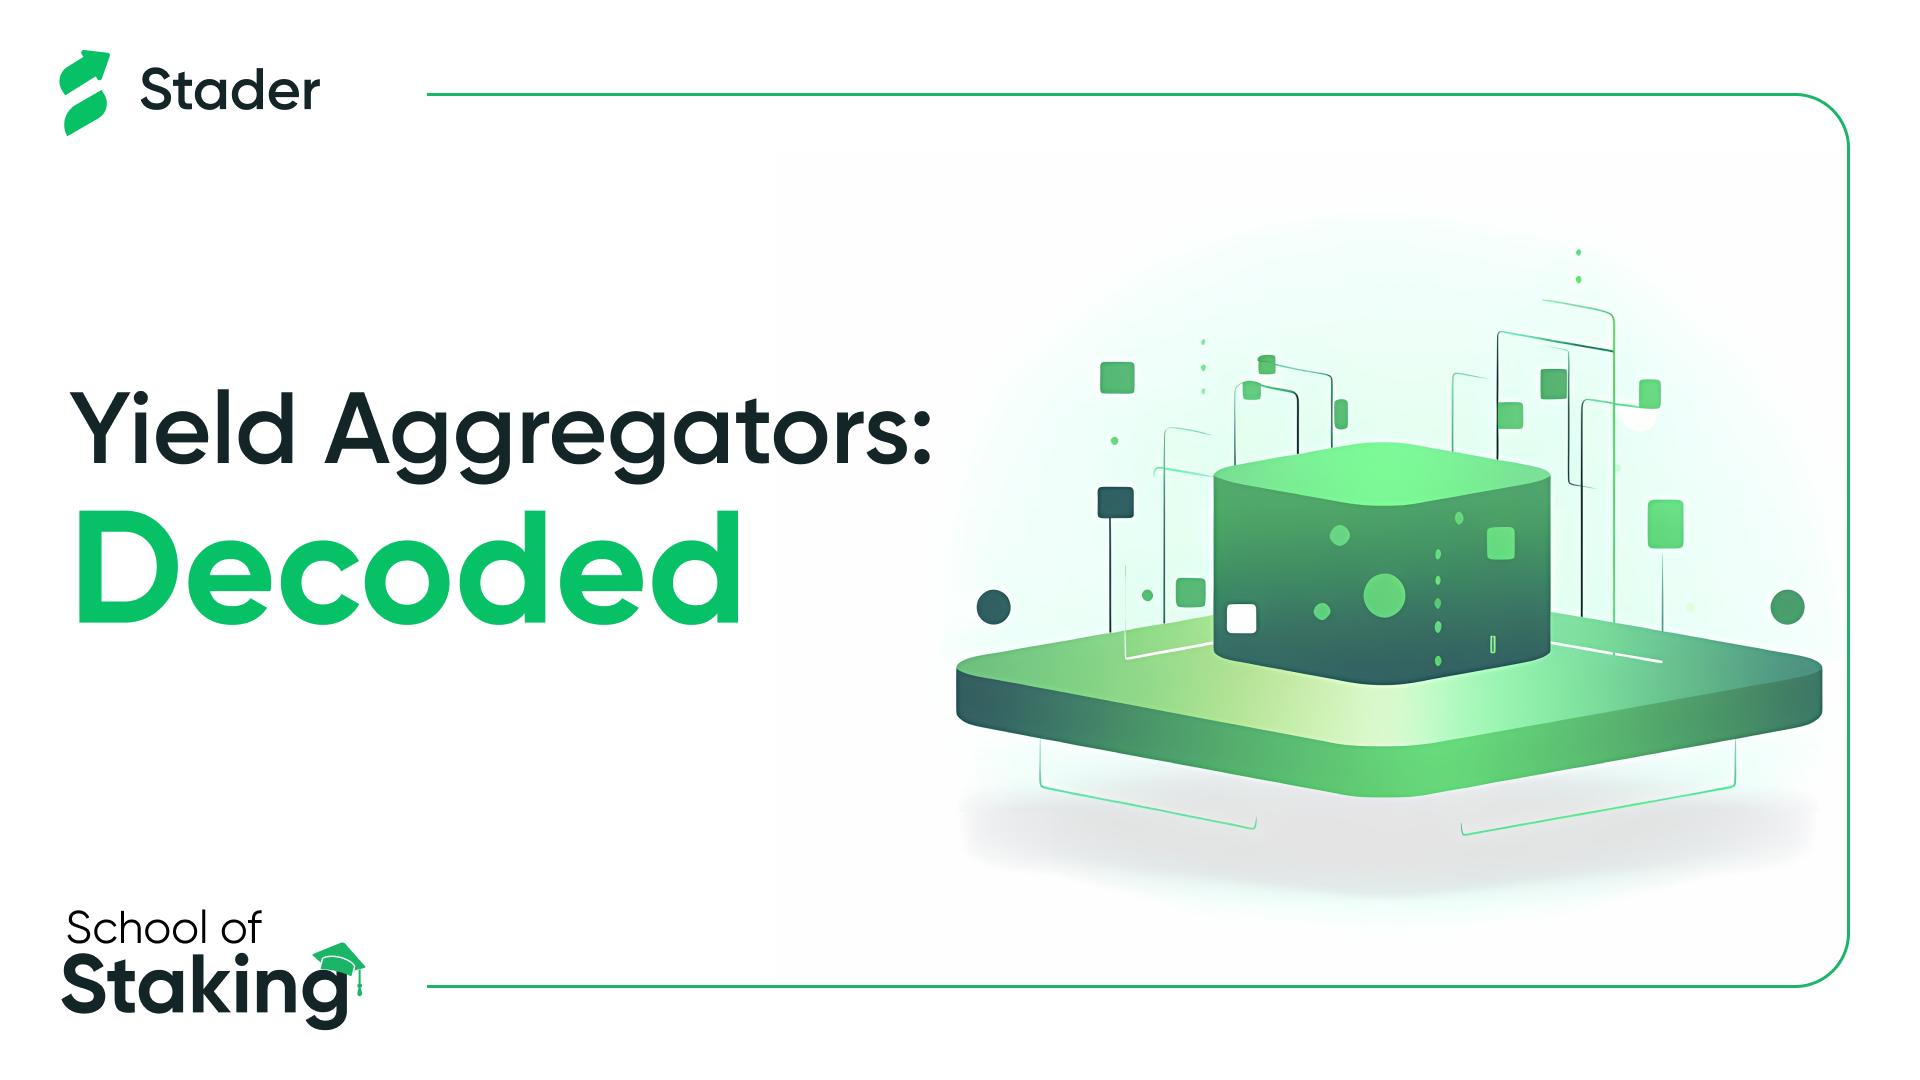 What are yield aggregators?